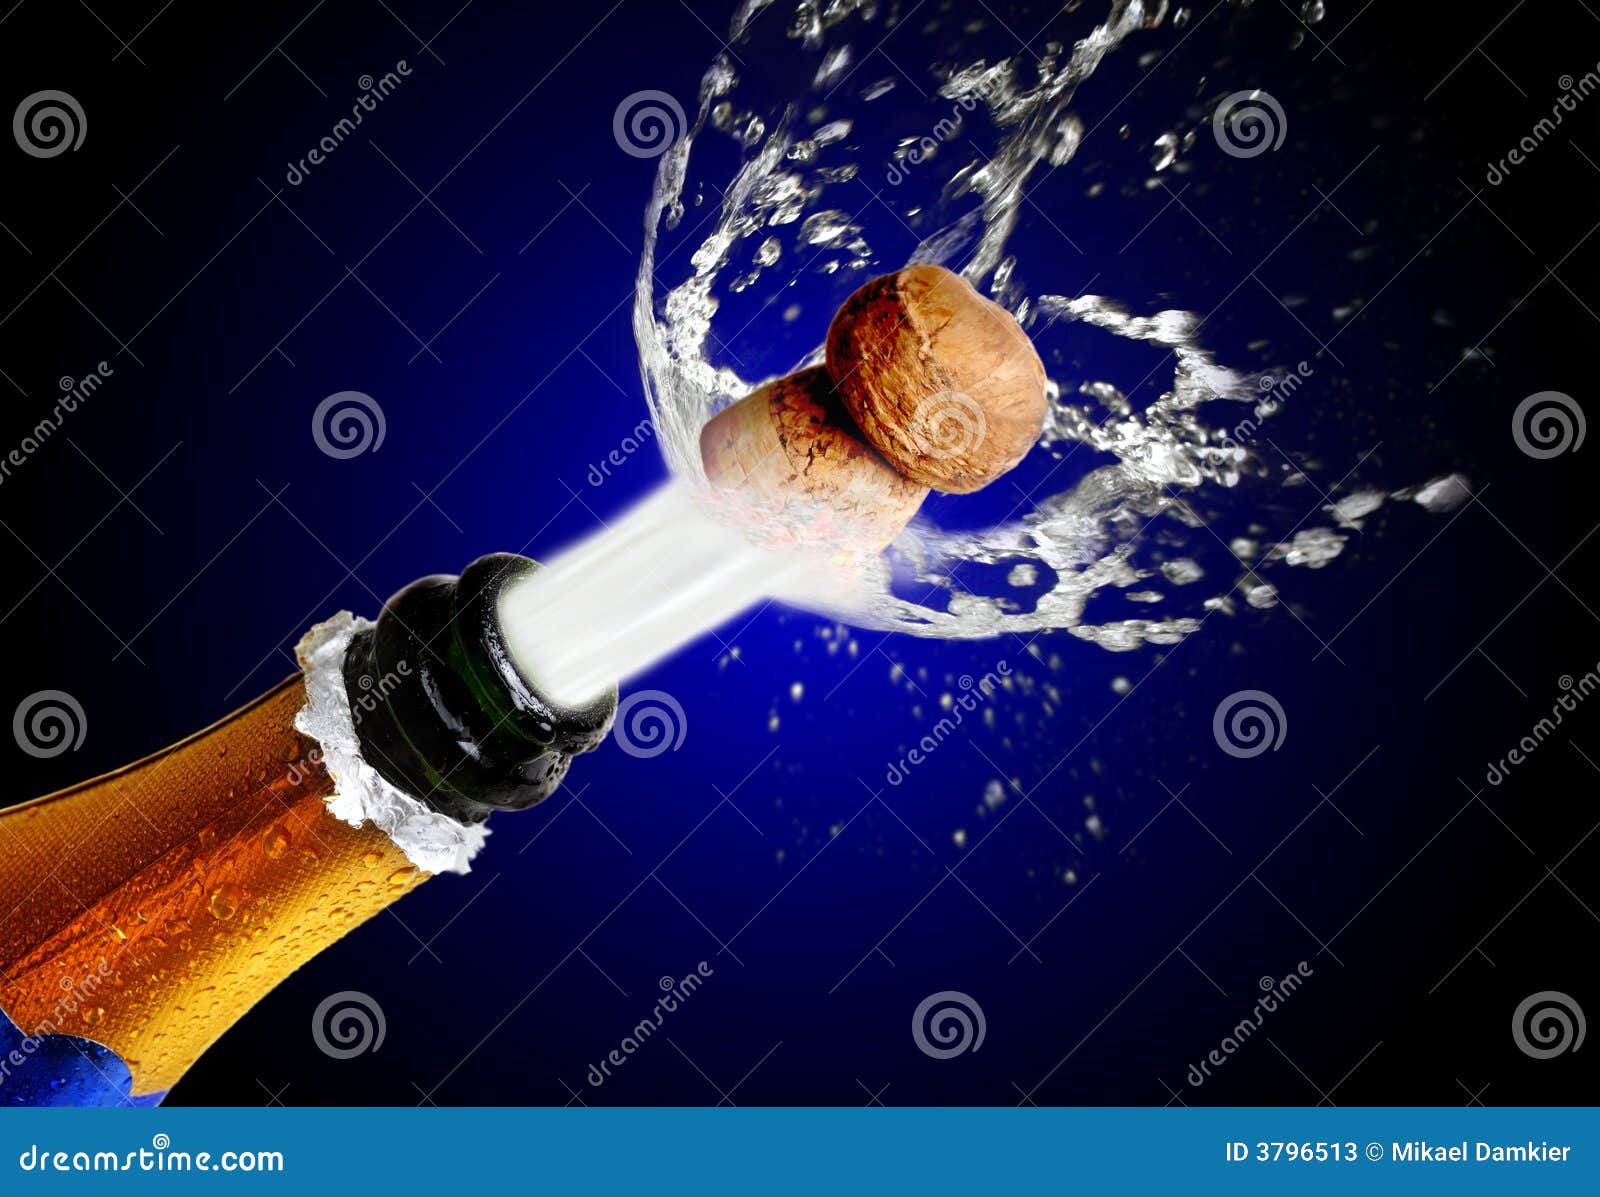 close up of champagne cork popping